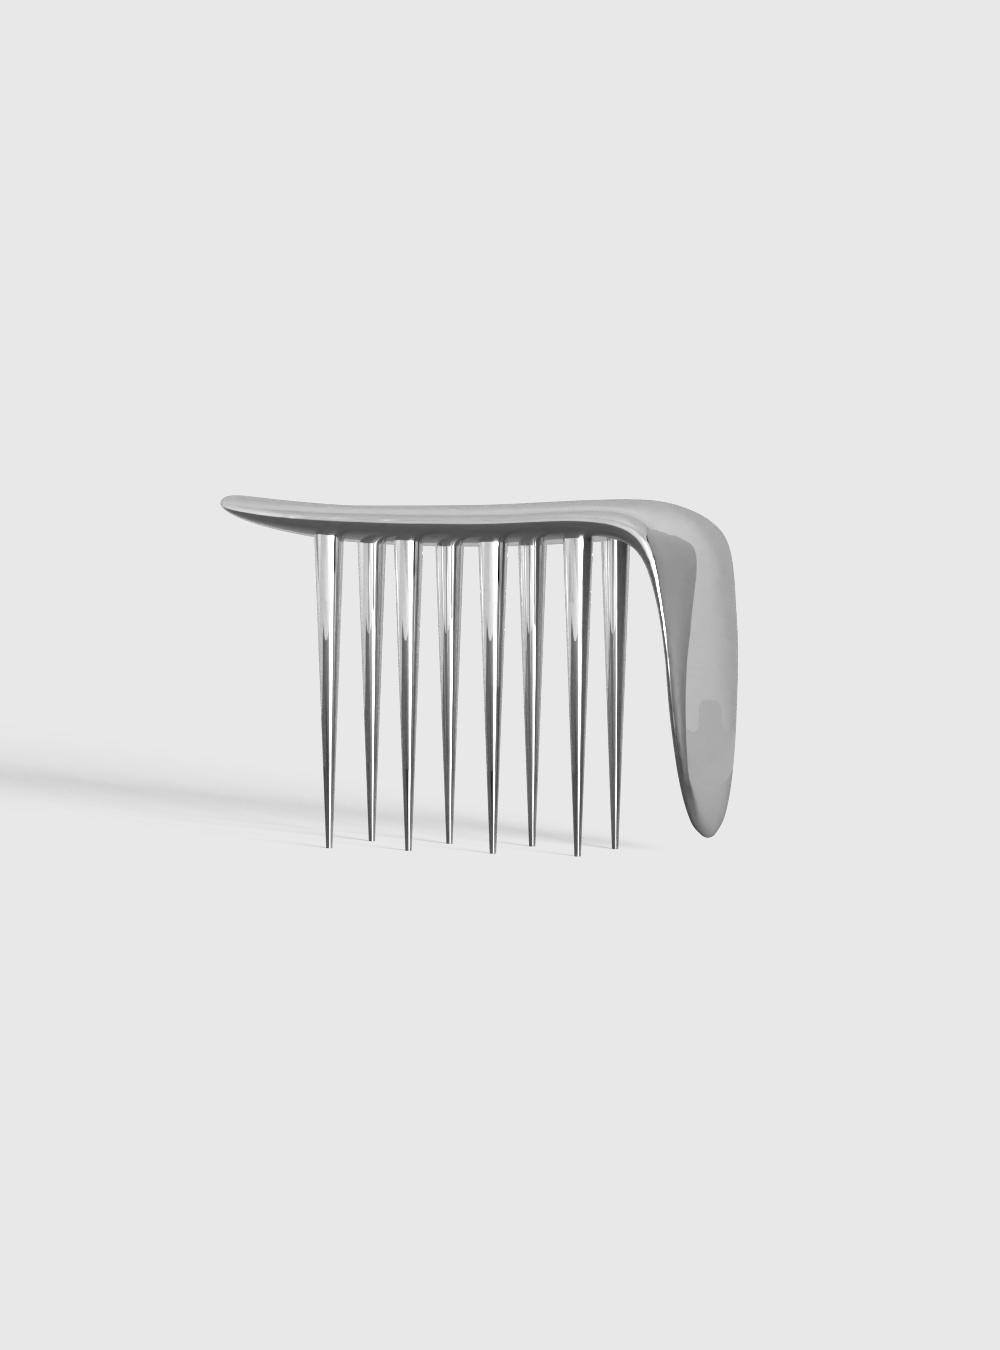 Run throught me ottoman by The Async
Dimensions: D 78 x W 33 x W 55 cm
Materials: Stainless steel.

